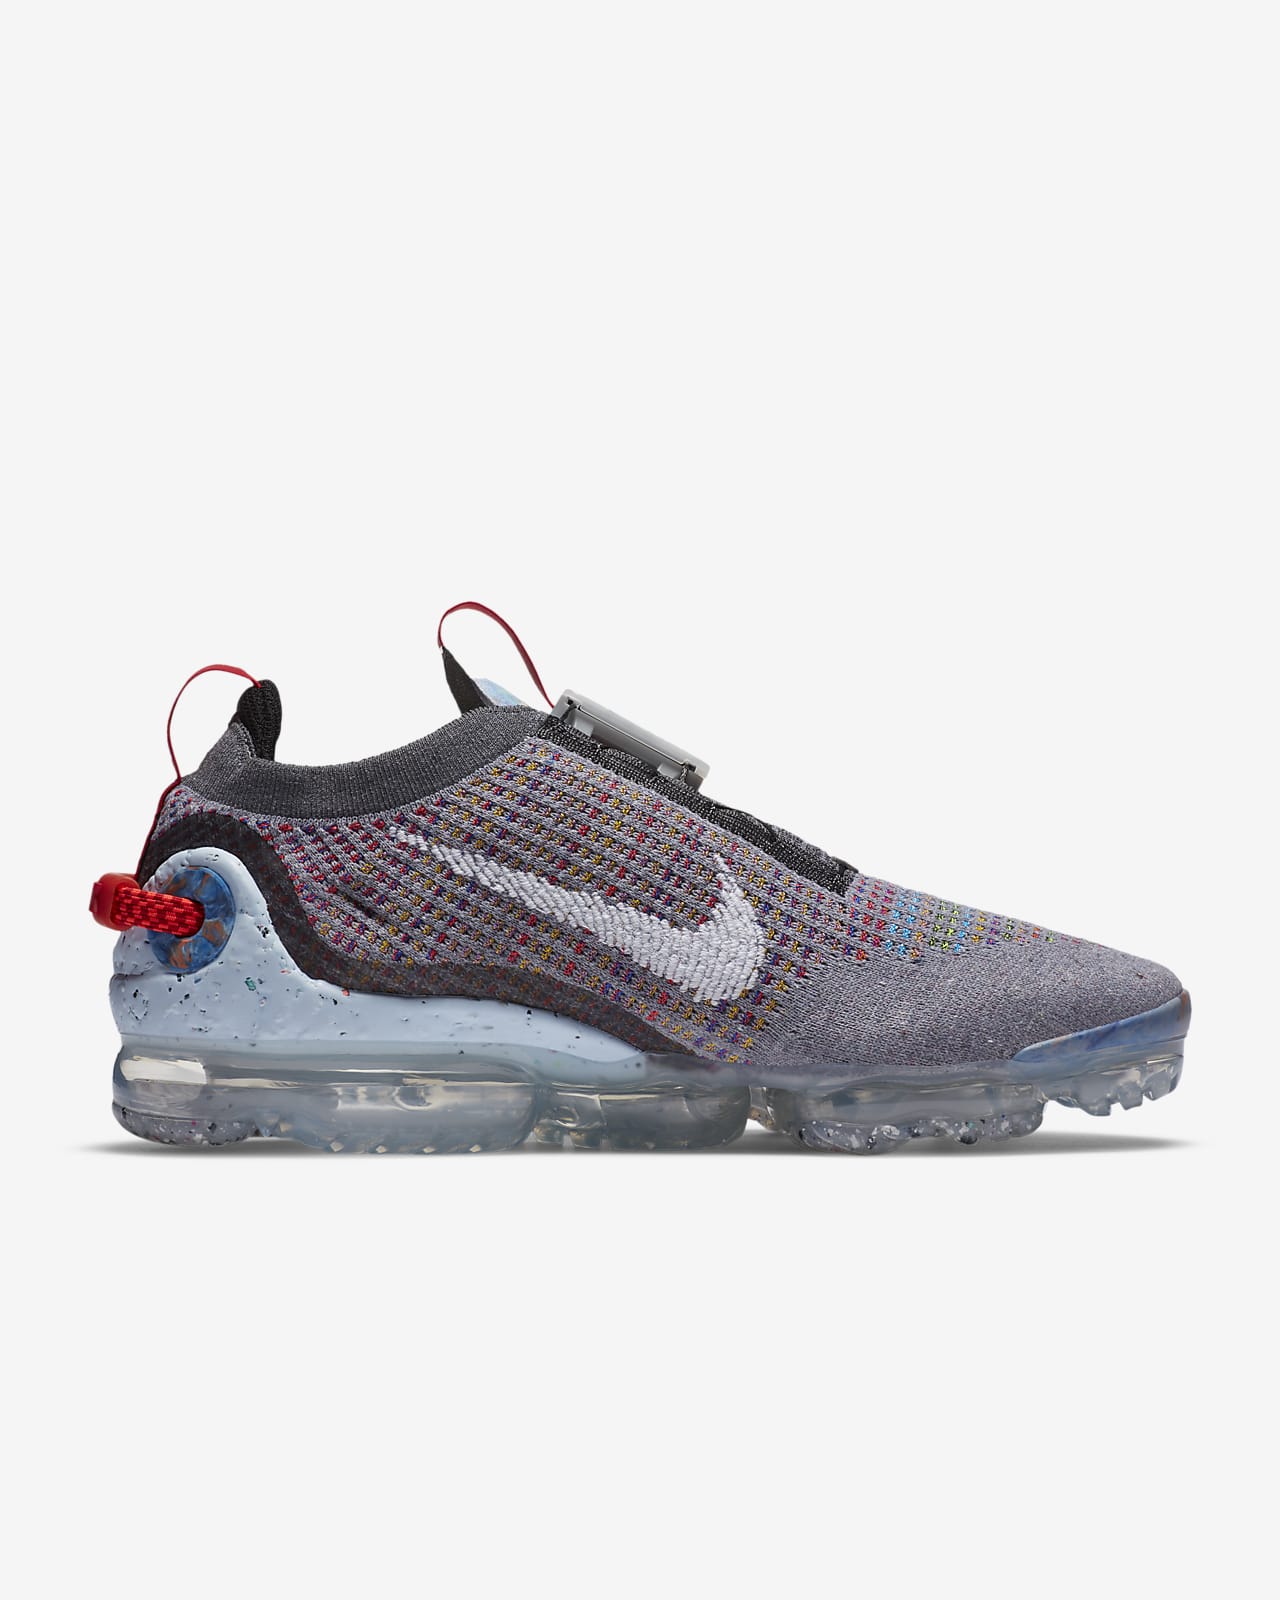 Nike Air Vapormax Flyknit Reviewed for Performance in 2020